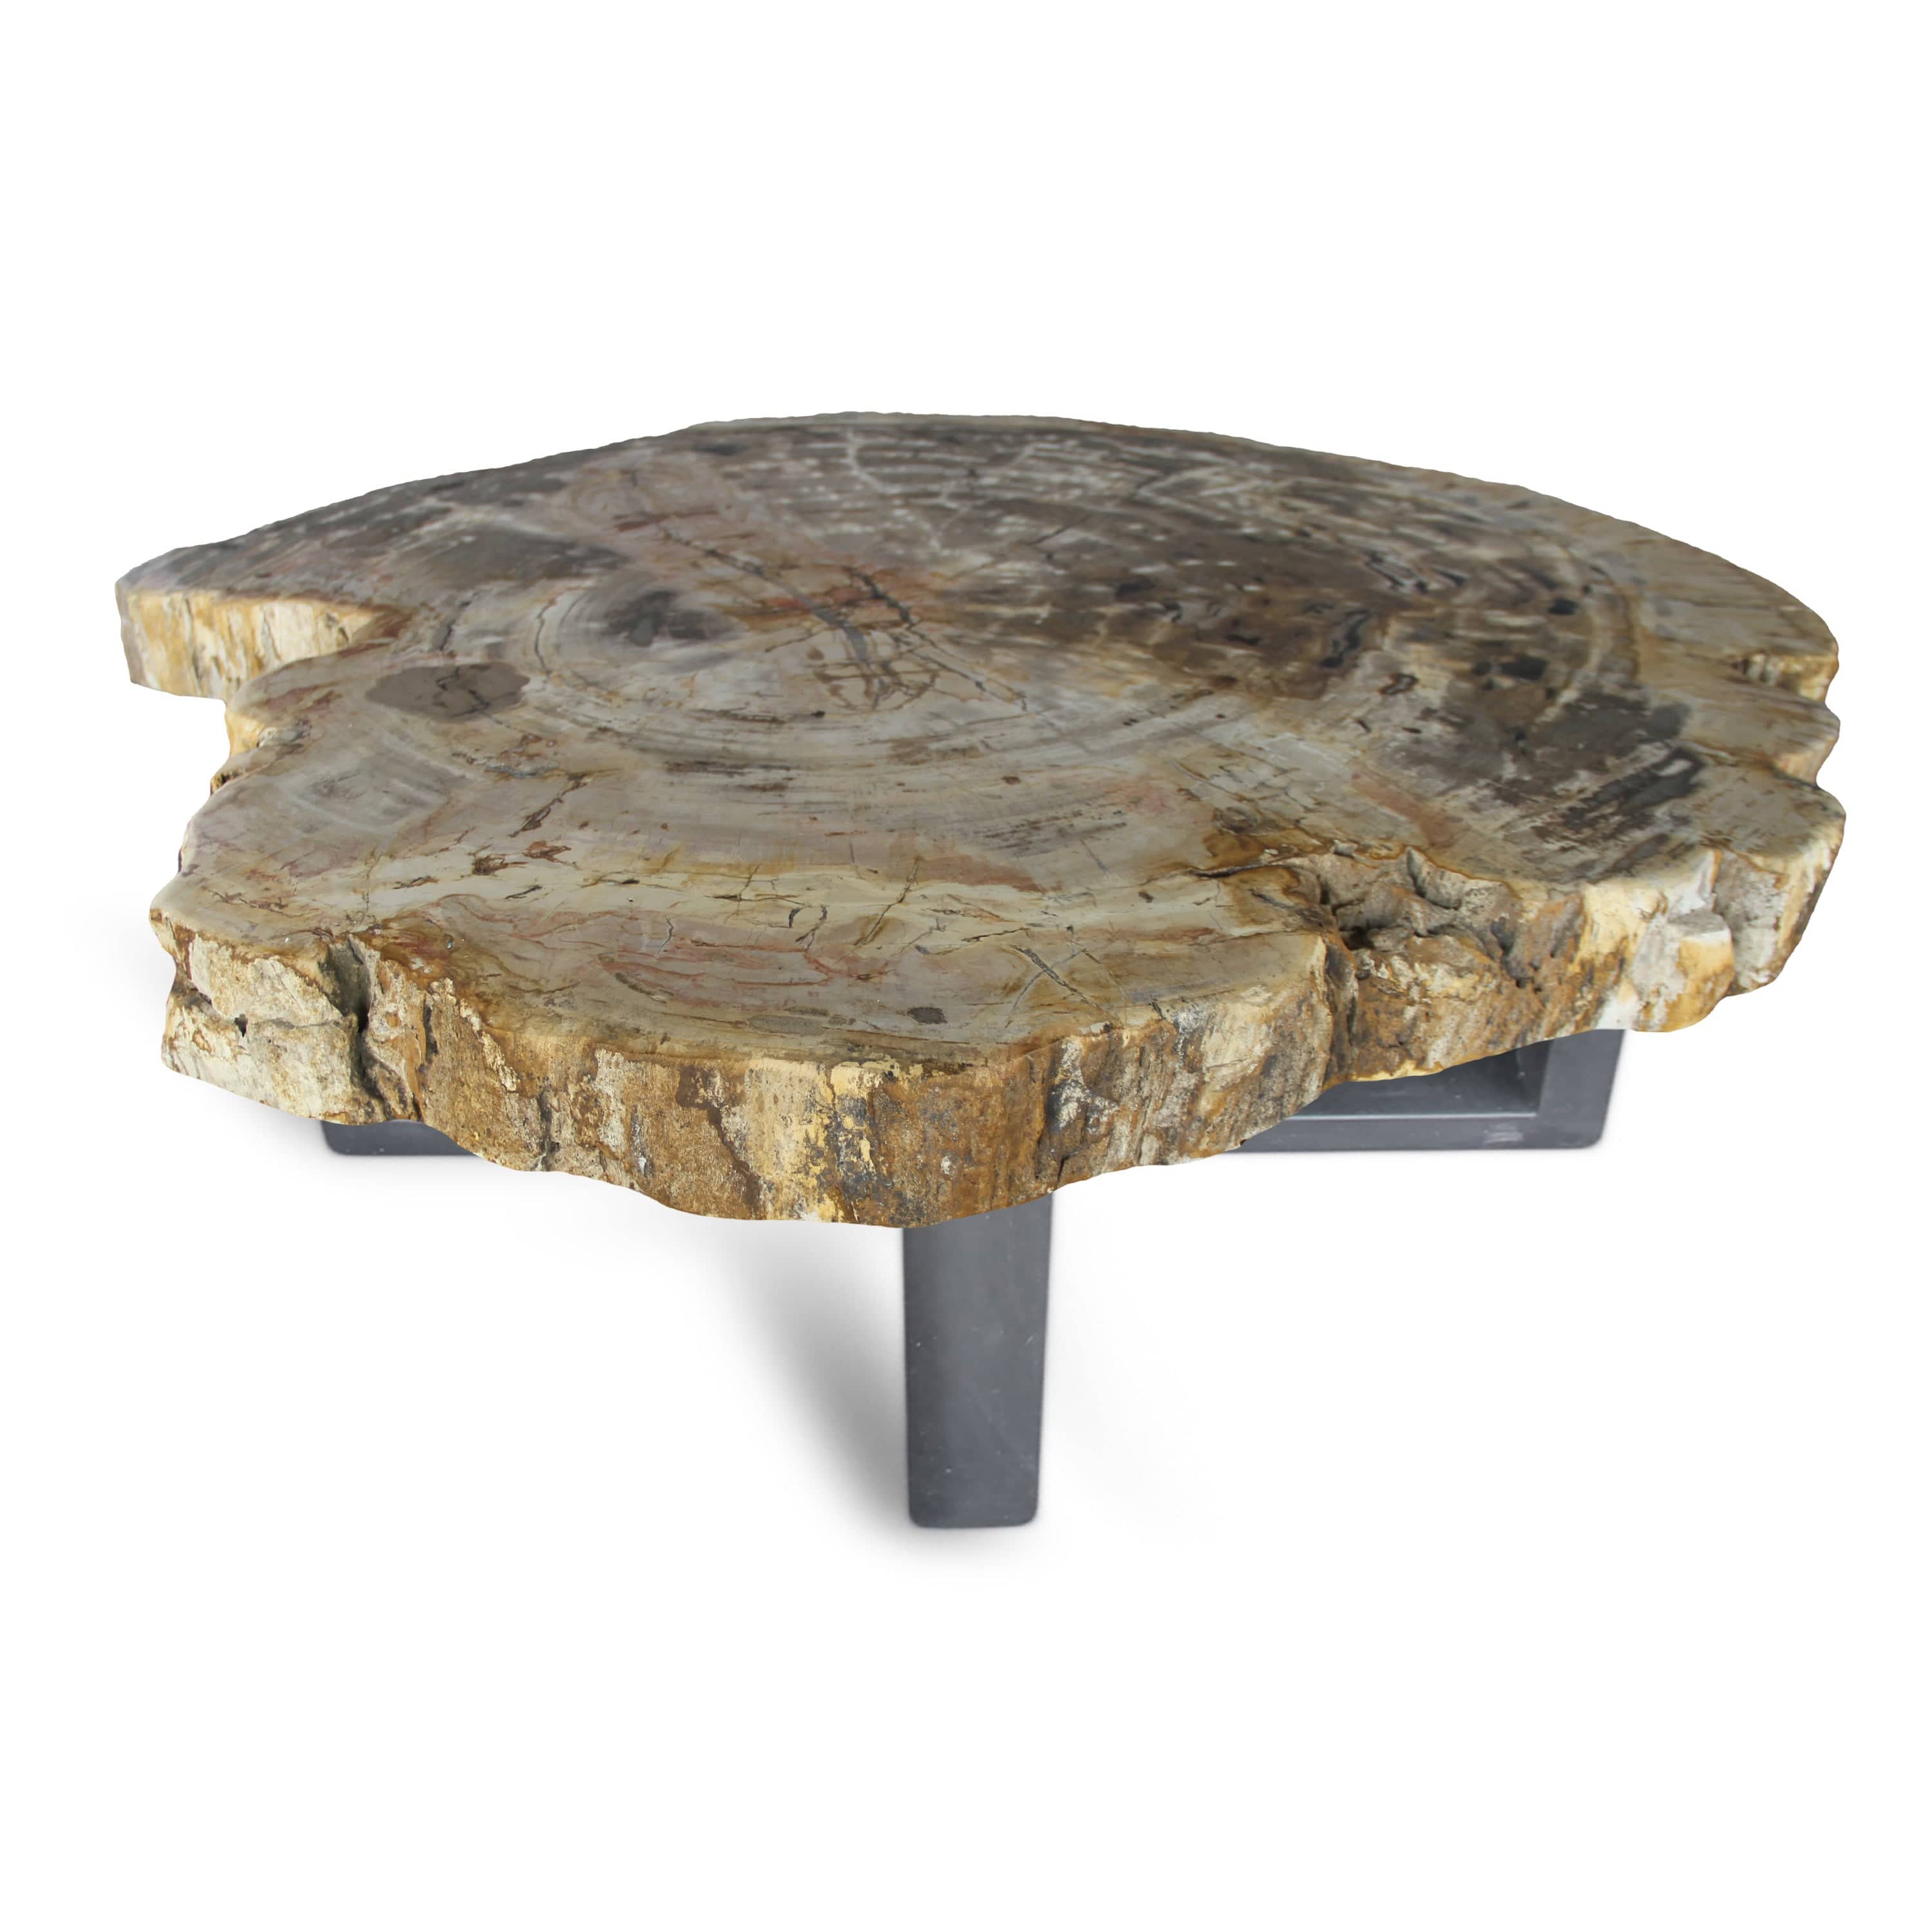 Kalifano Petrified Wood Petrified Wood Round Slab Coffee Table from Indonesia - 43" / 282 lbs PWT10400.002